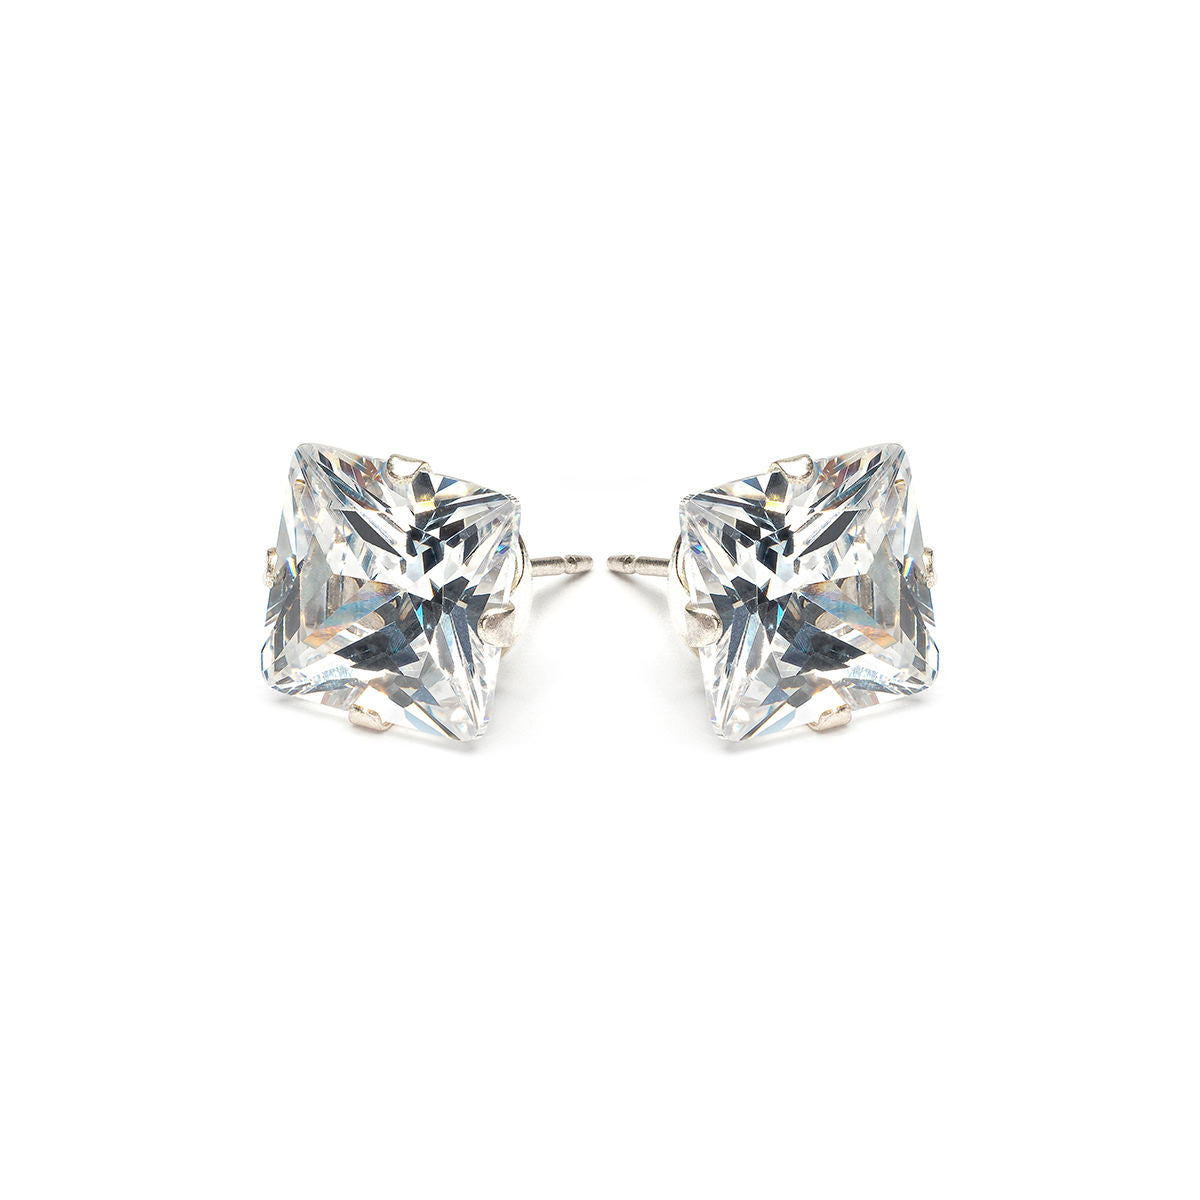 Sterling Silver 8 mm Square Cubic Zirconia Stud Earrings - Simply Whispers